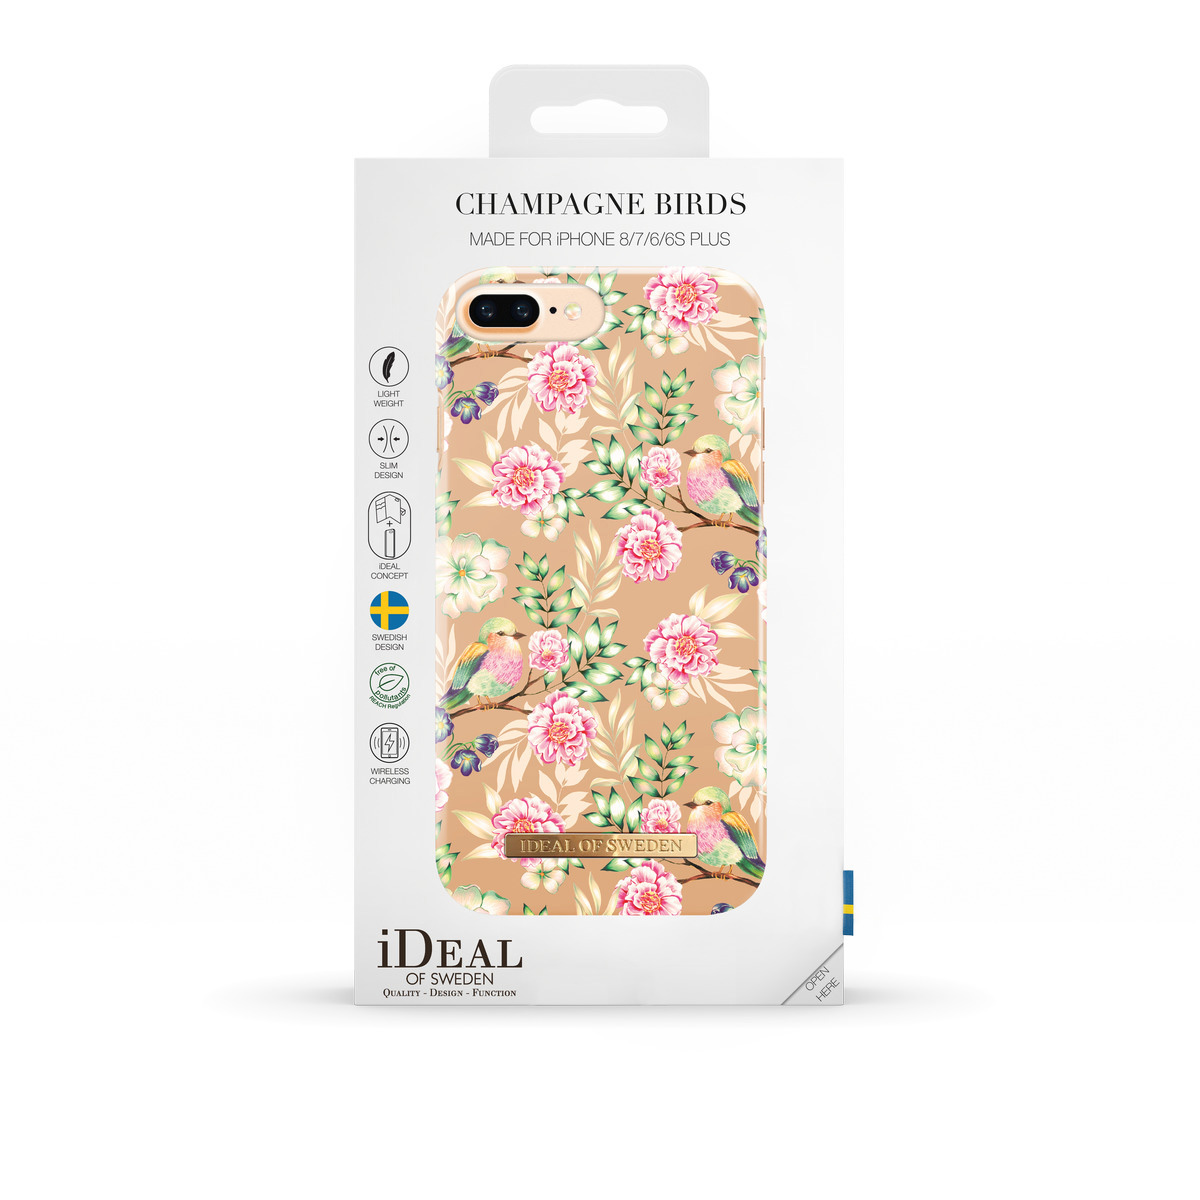 Birds Champagne Plus, Fashion, IDEAL Plus Apple, OF Plus, 6 ,iPhone 7 iPhone Backcover, 8 iPhone SWEDEN